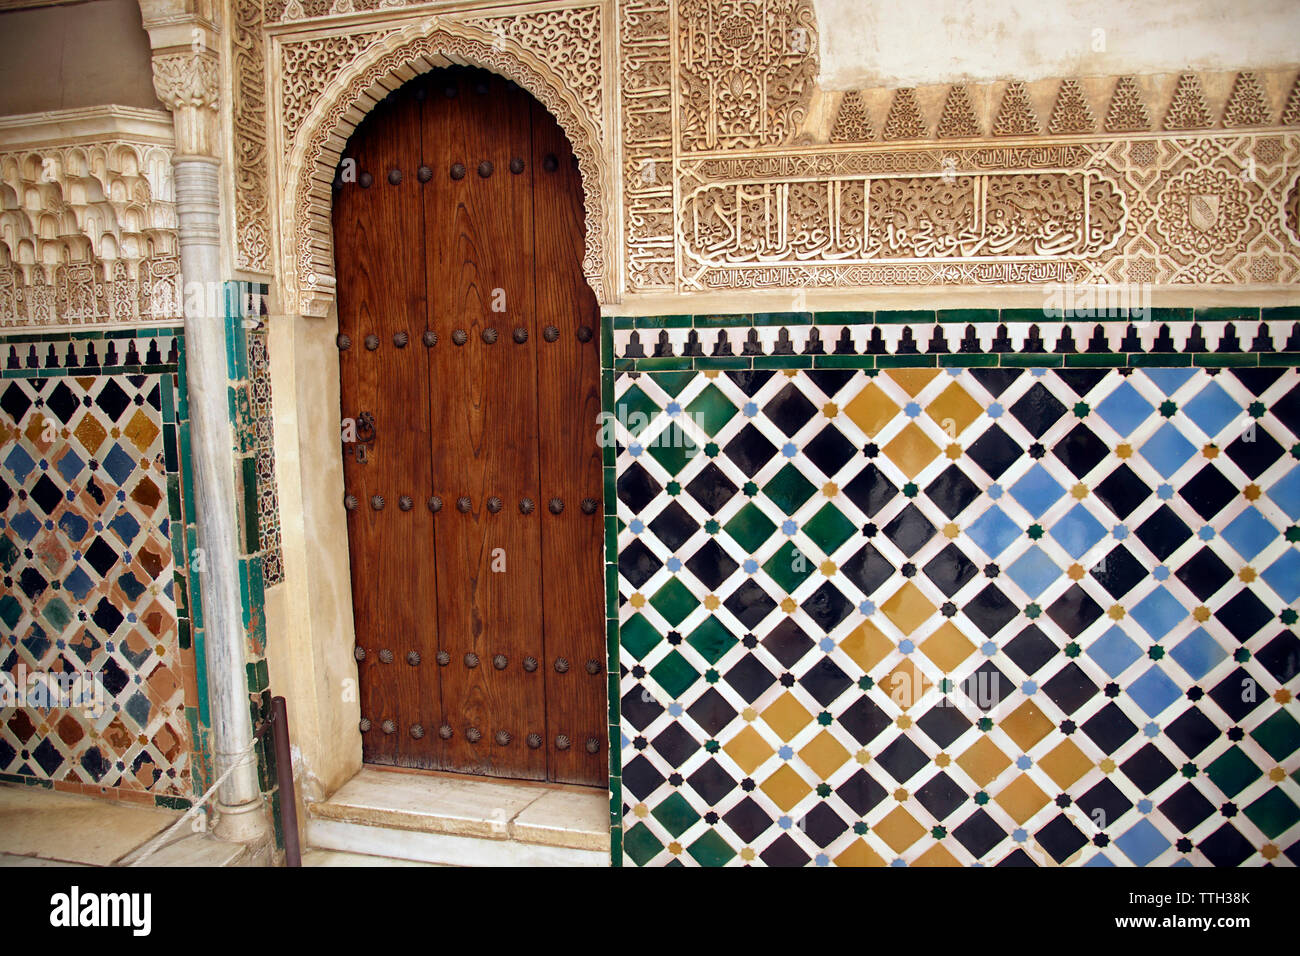 https://c8.alamy.com/comp/TTH38K/islamic-art-tiled-wall-and-door-in-the-alhambra-palace-TTH38K.jpg